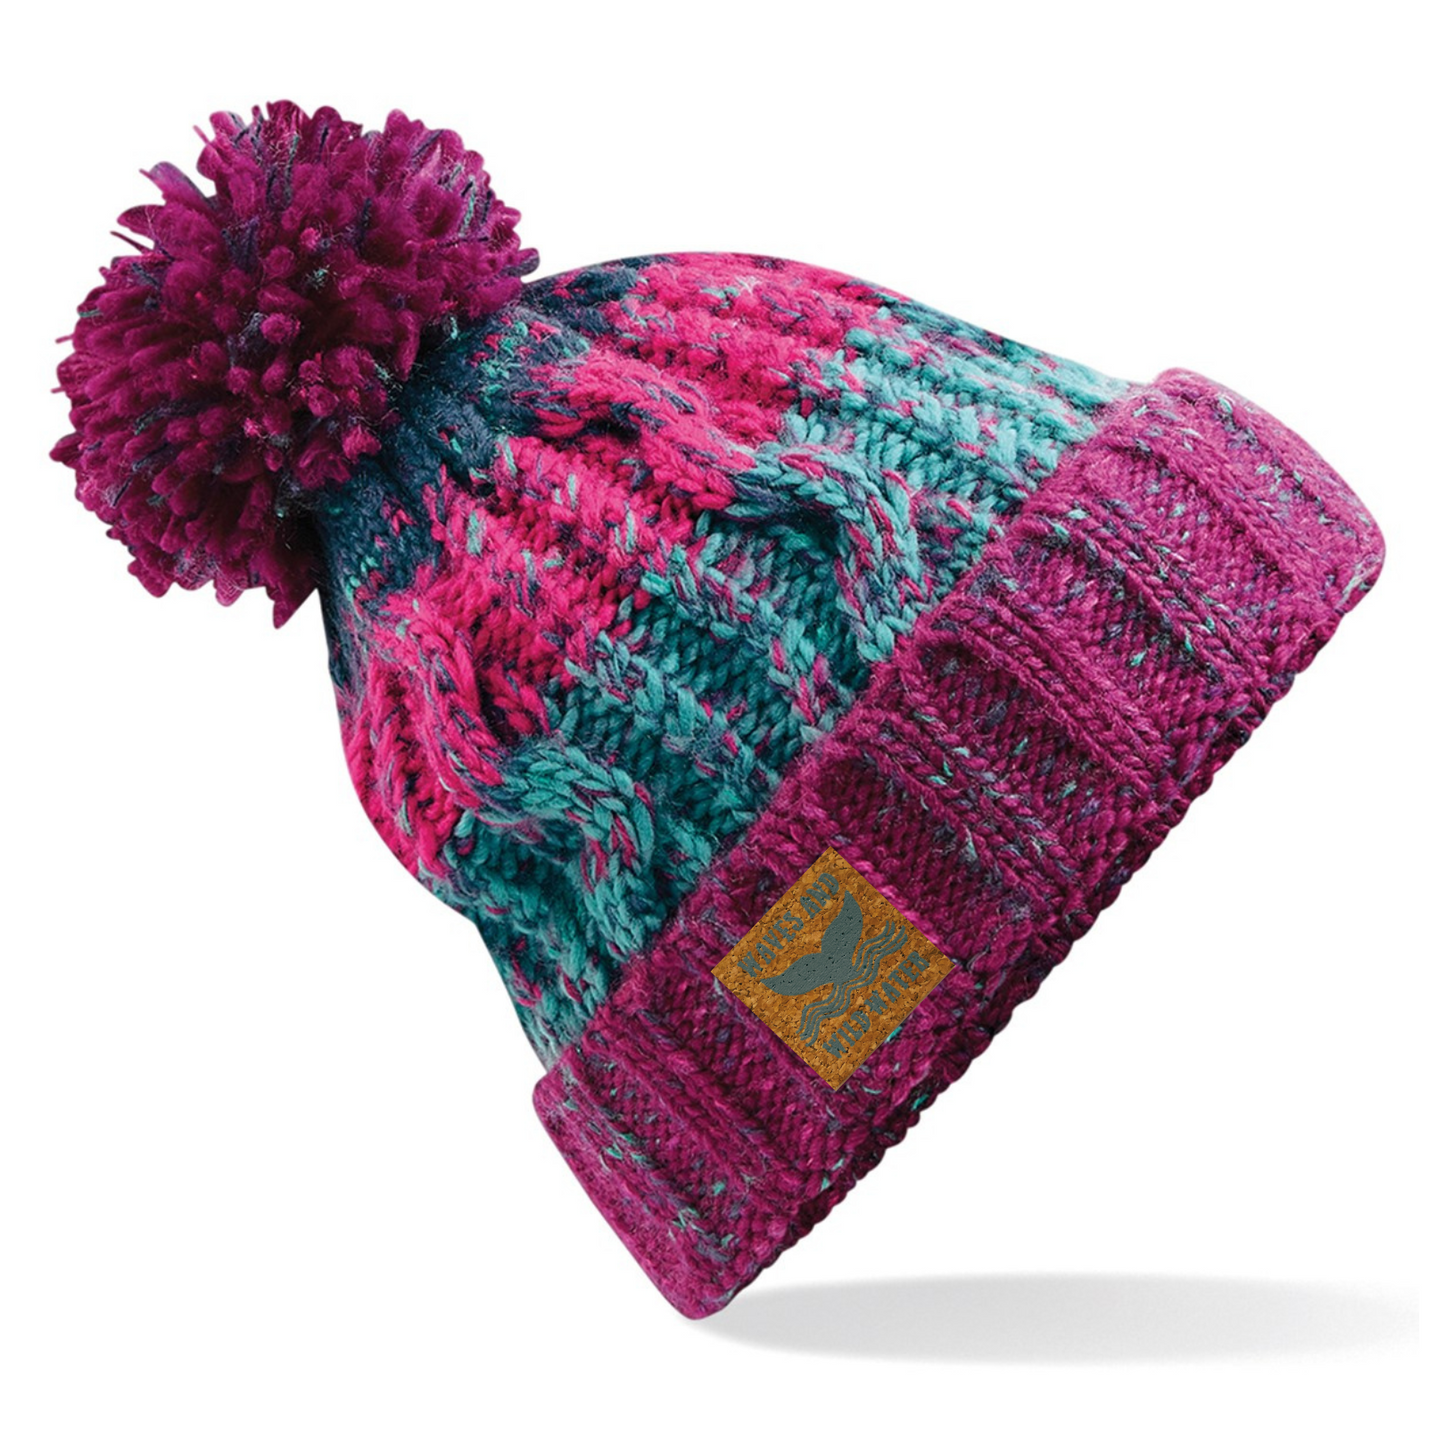 A pink and blue knitted pom pom beanie hat.